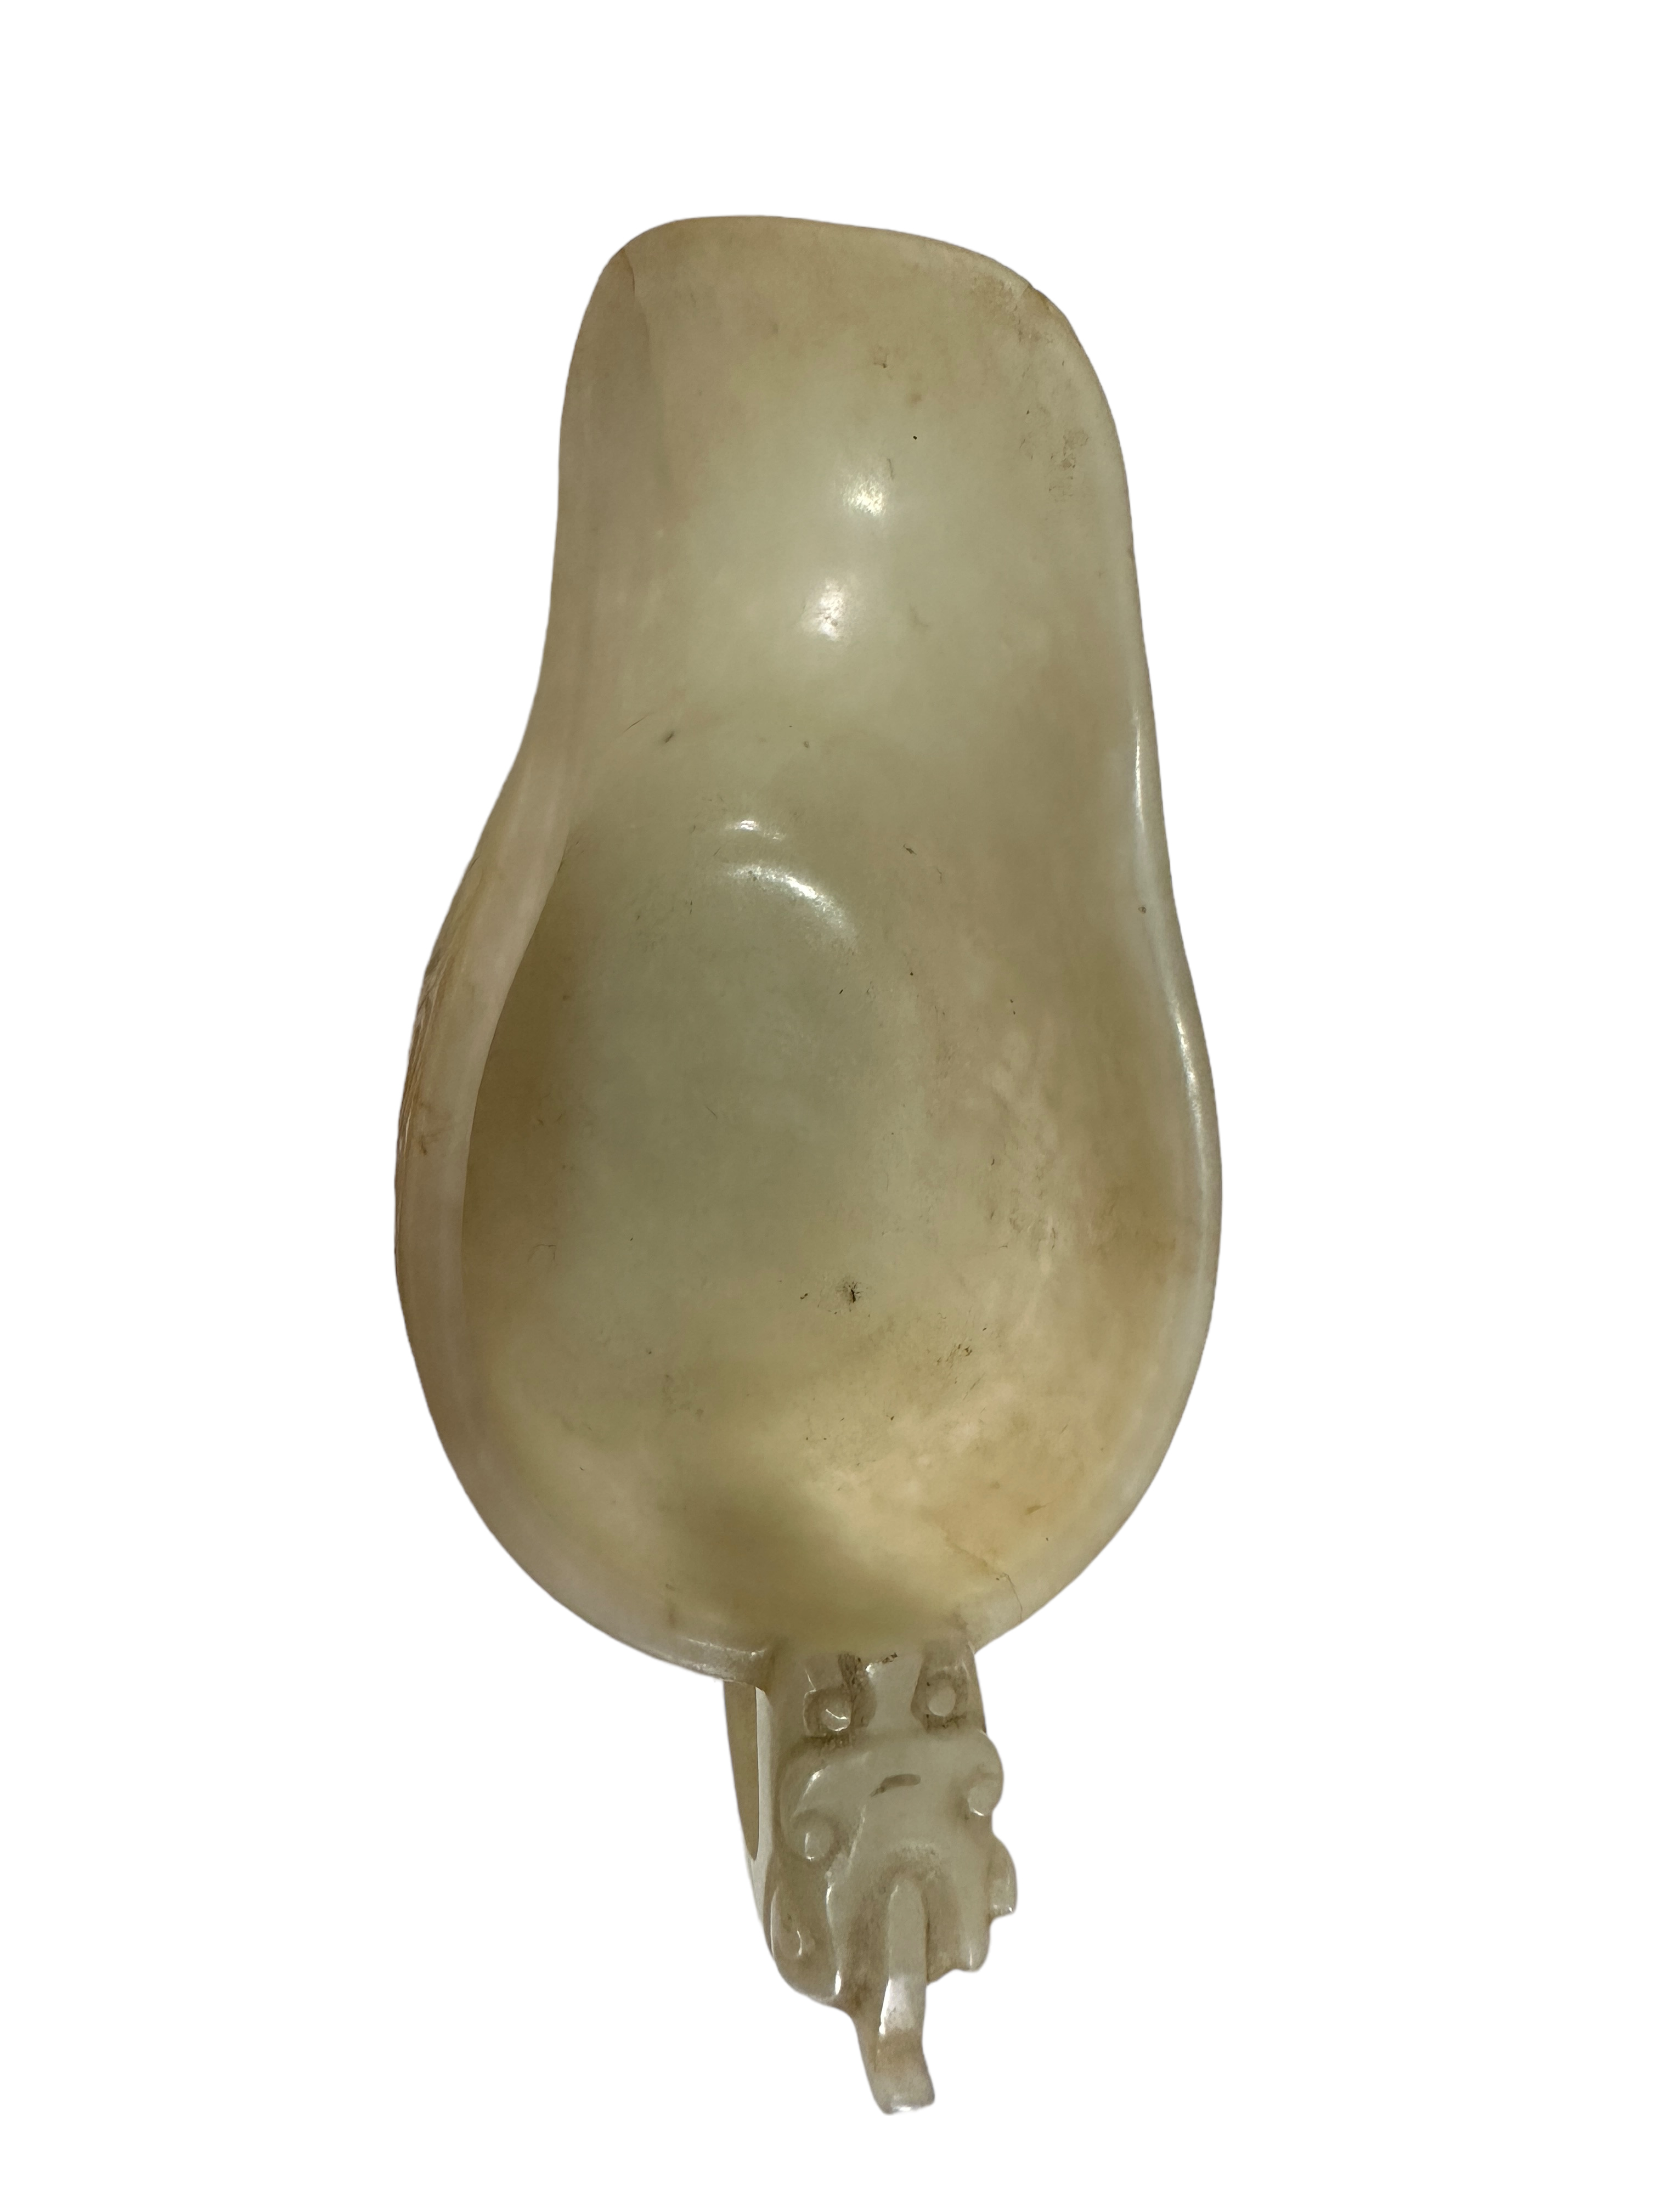 A CHINESE CELADON JADE LIBATION CUP on stand, Ch'ien Lung Period?-ex John Sparks London - Image 6 of 24